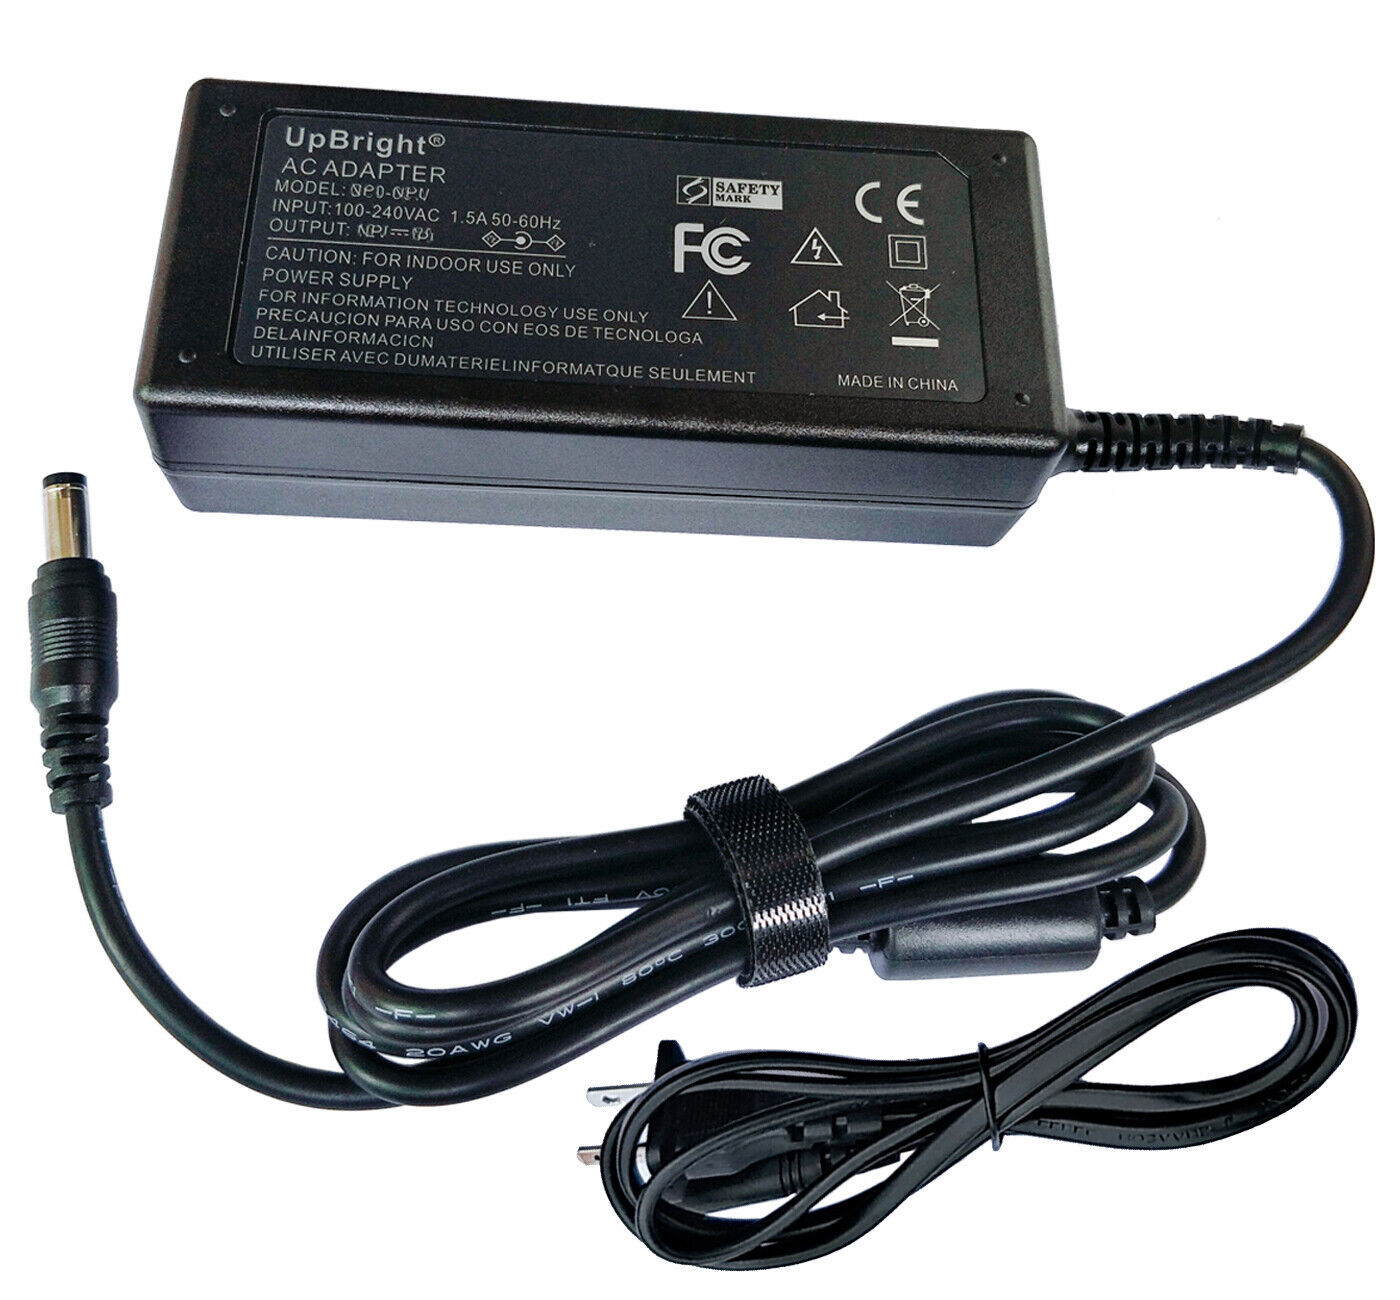 New 19V Ac/Dc Adapter For Lg 49Lj510M 49" 1080P Led Tv Power Supply Cord Charger - $45.59